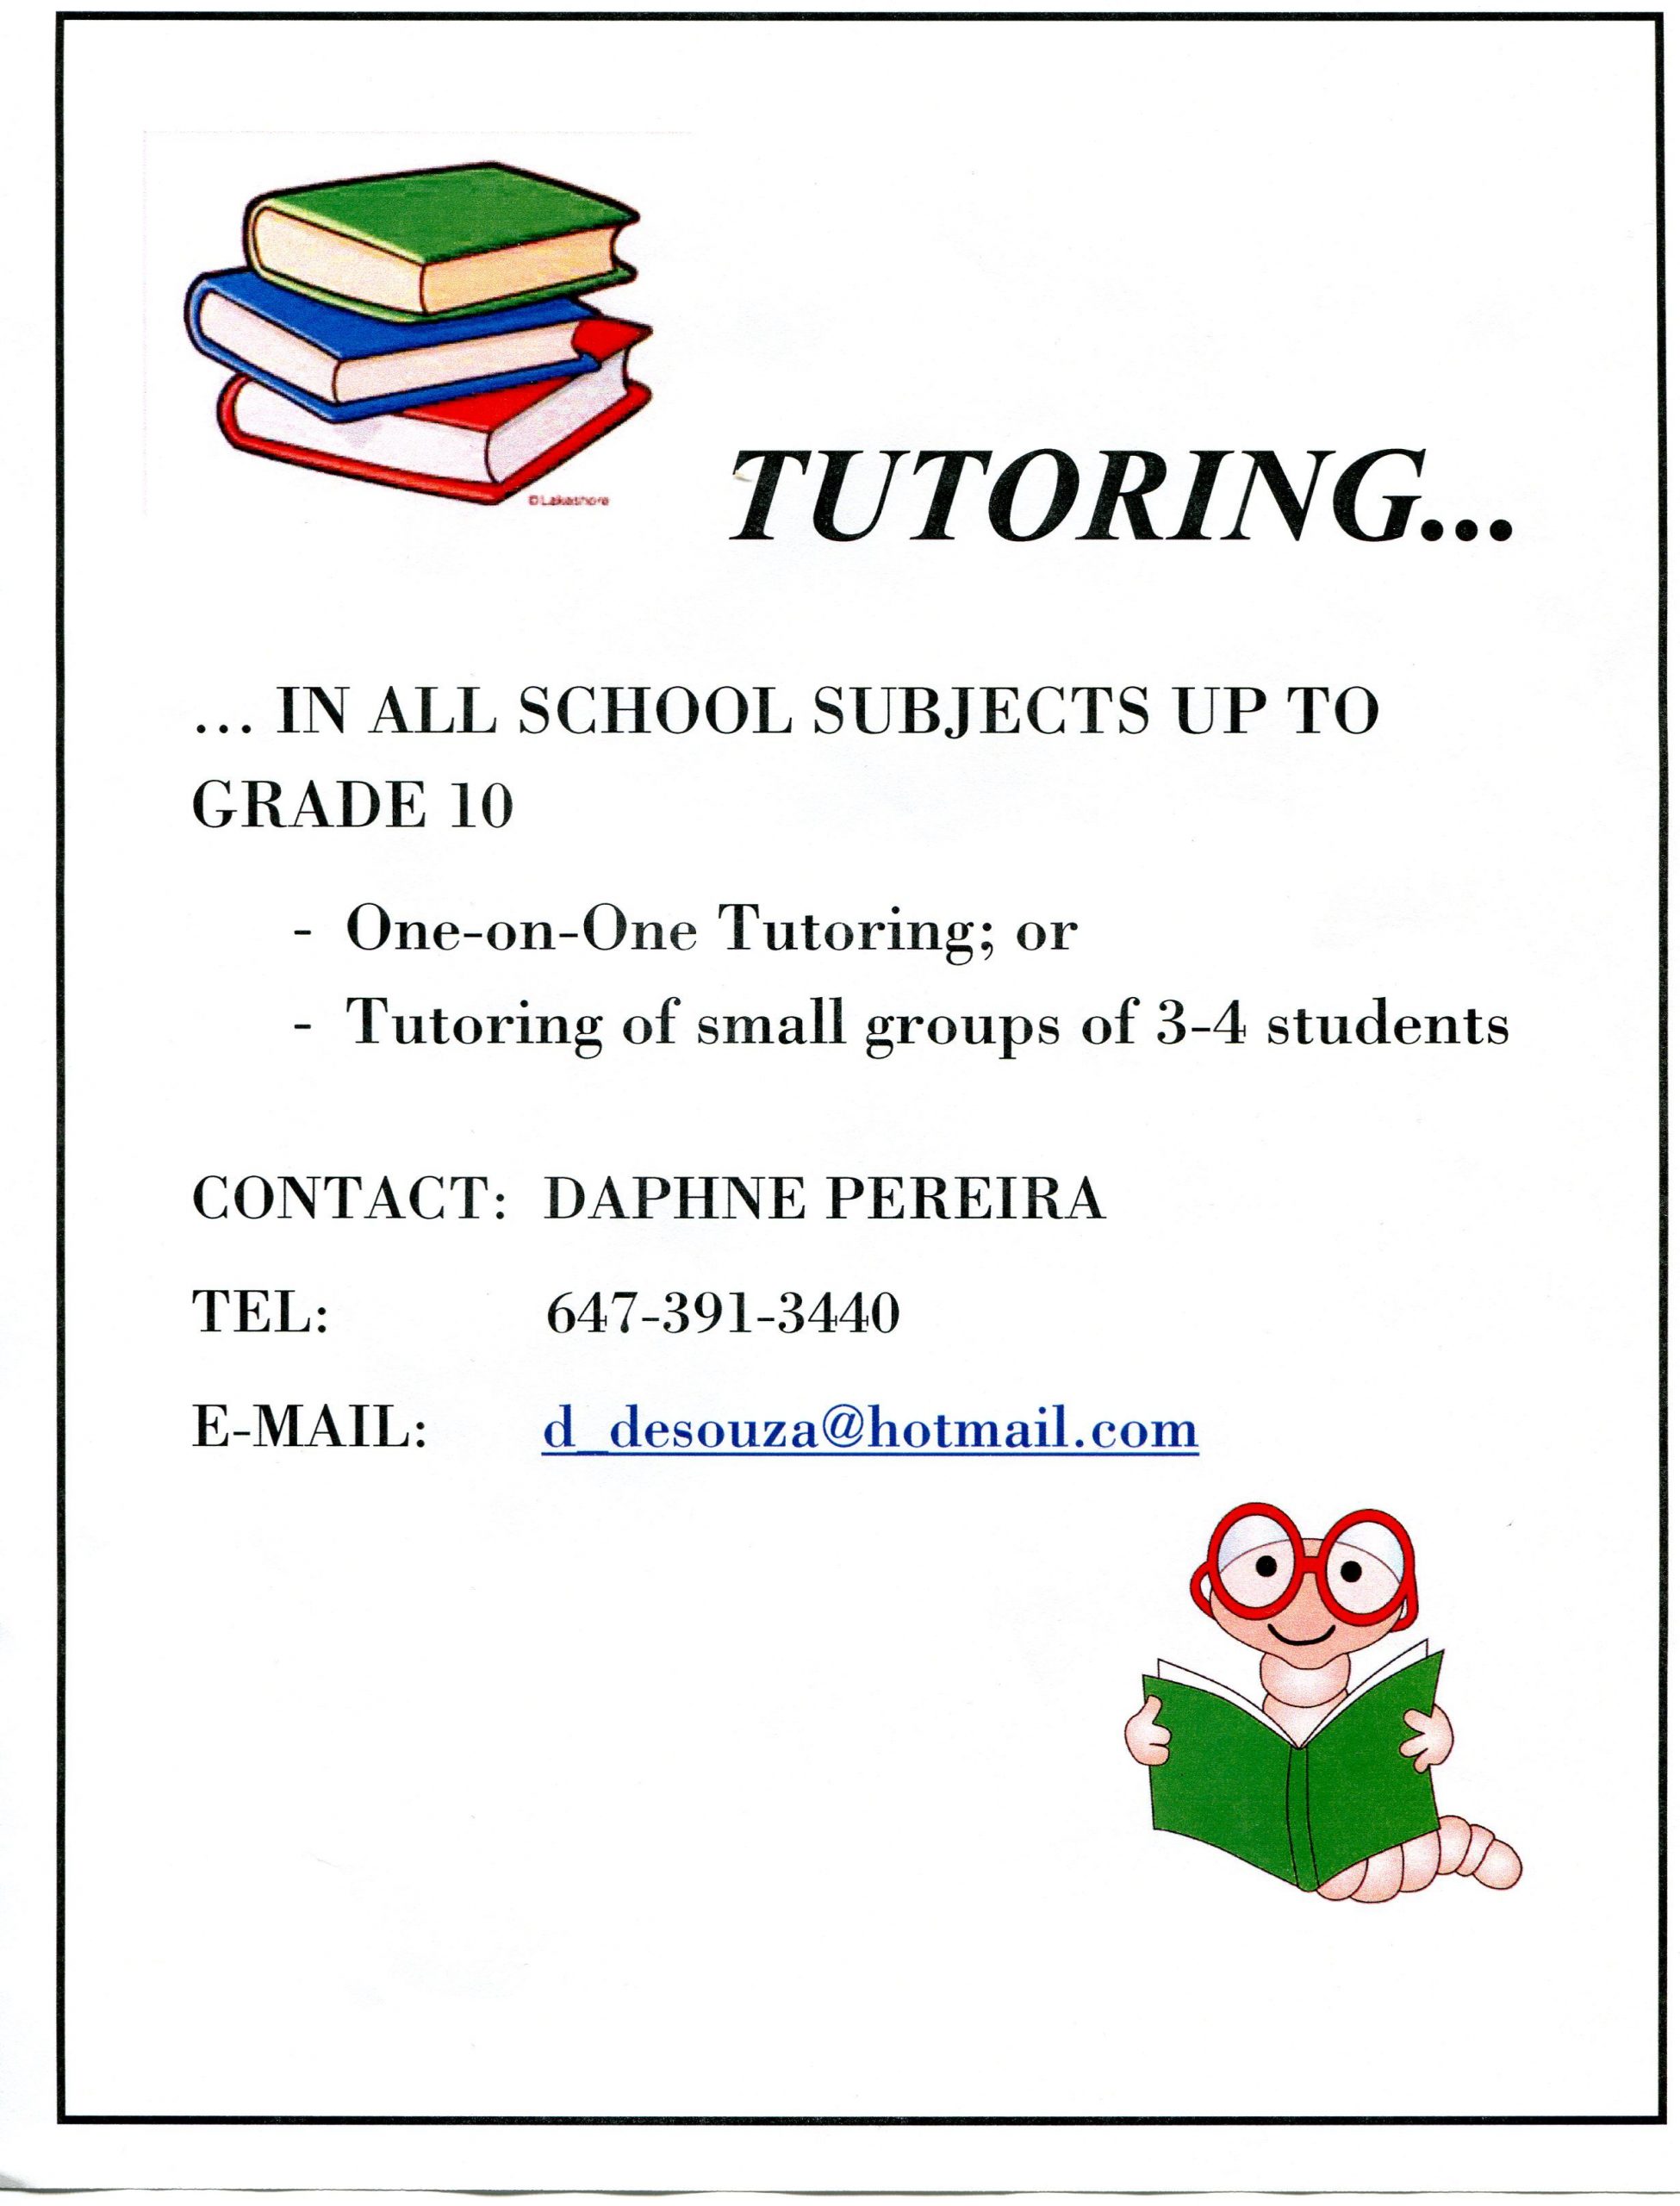 tutoring flyer template free, tuition flyer template free download, tutoring flyer template word, tutoring poster template, tutor poster template, private lessons flyer template, free printable private tutor flyers, tutoring flyer template doc, tutor flyer template free, free template for tutoring services